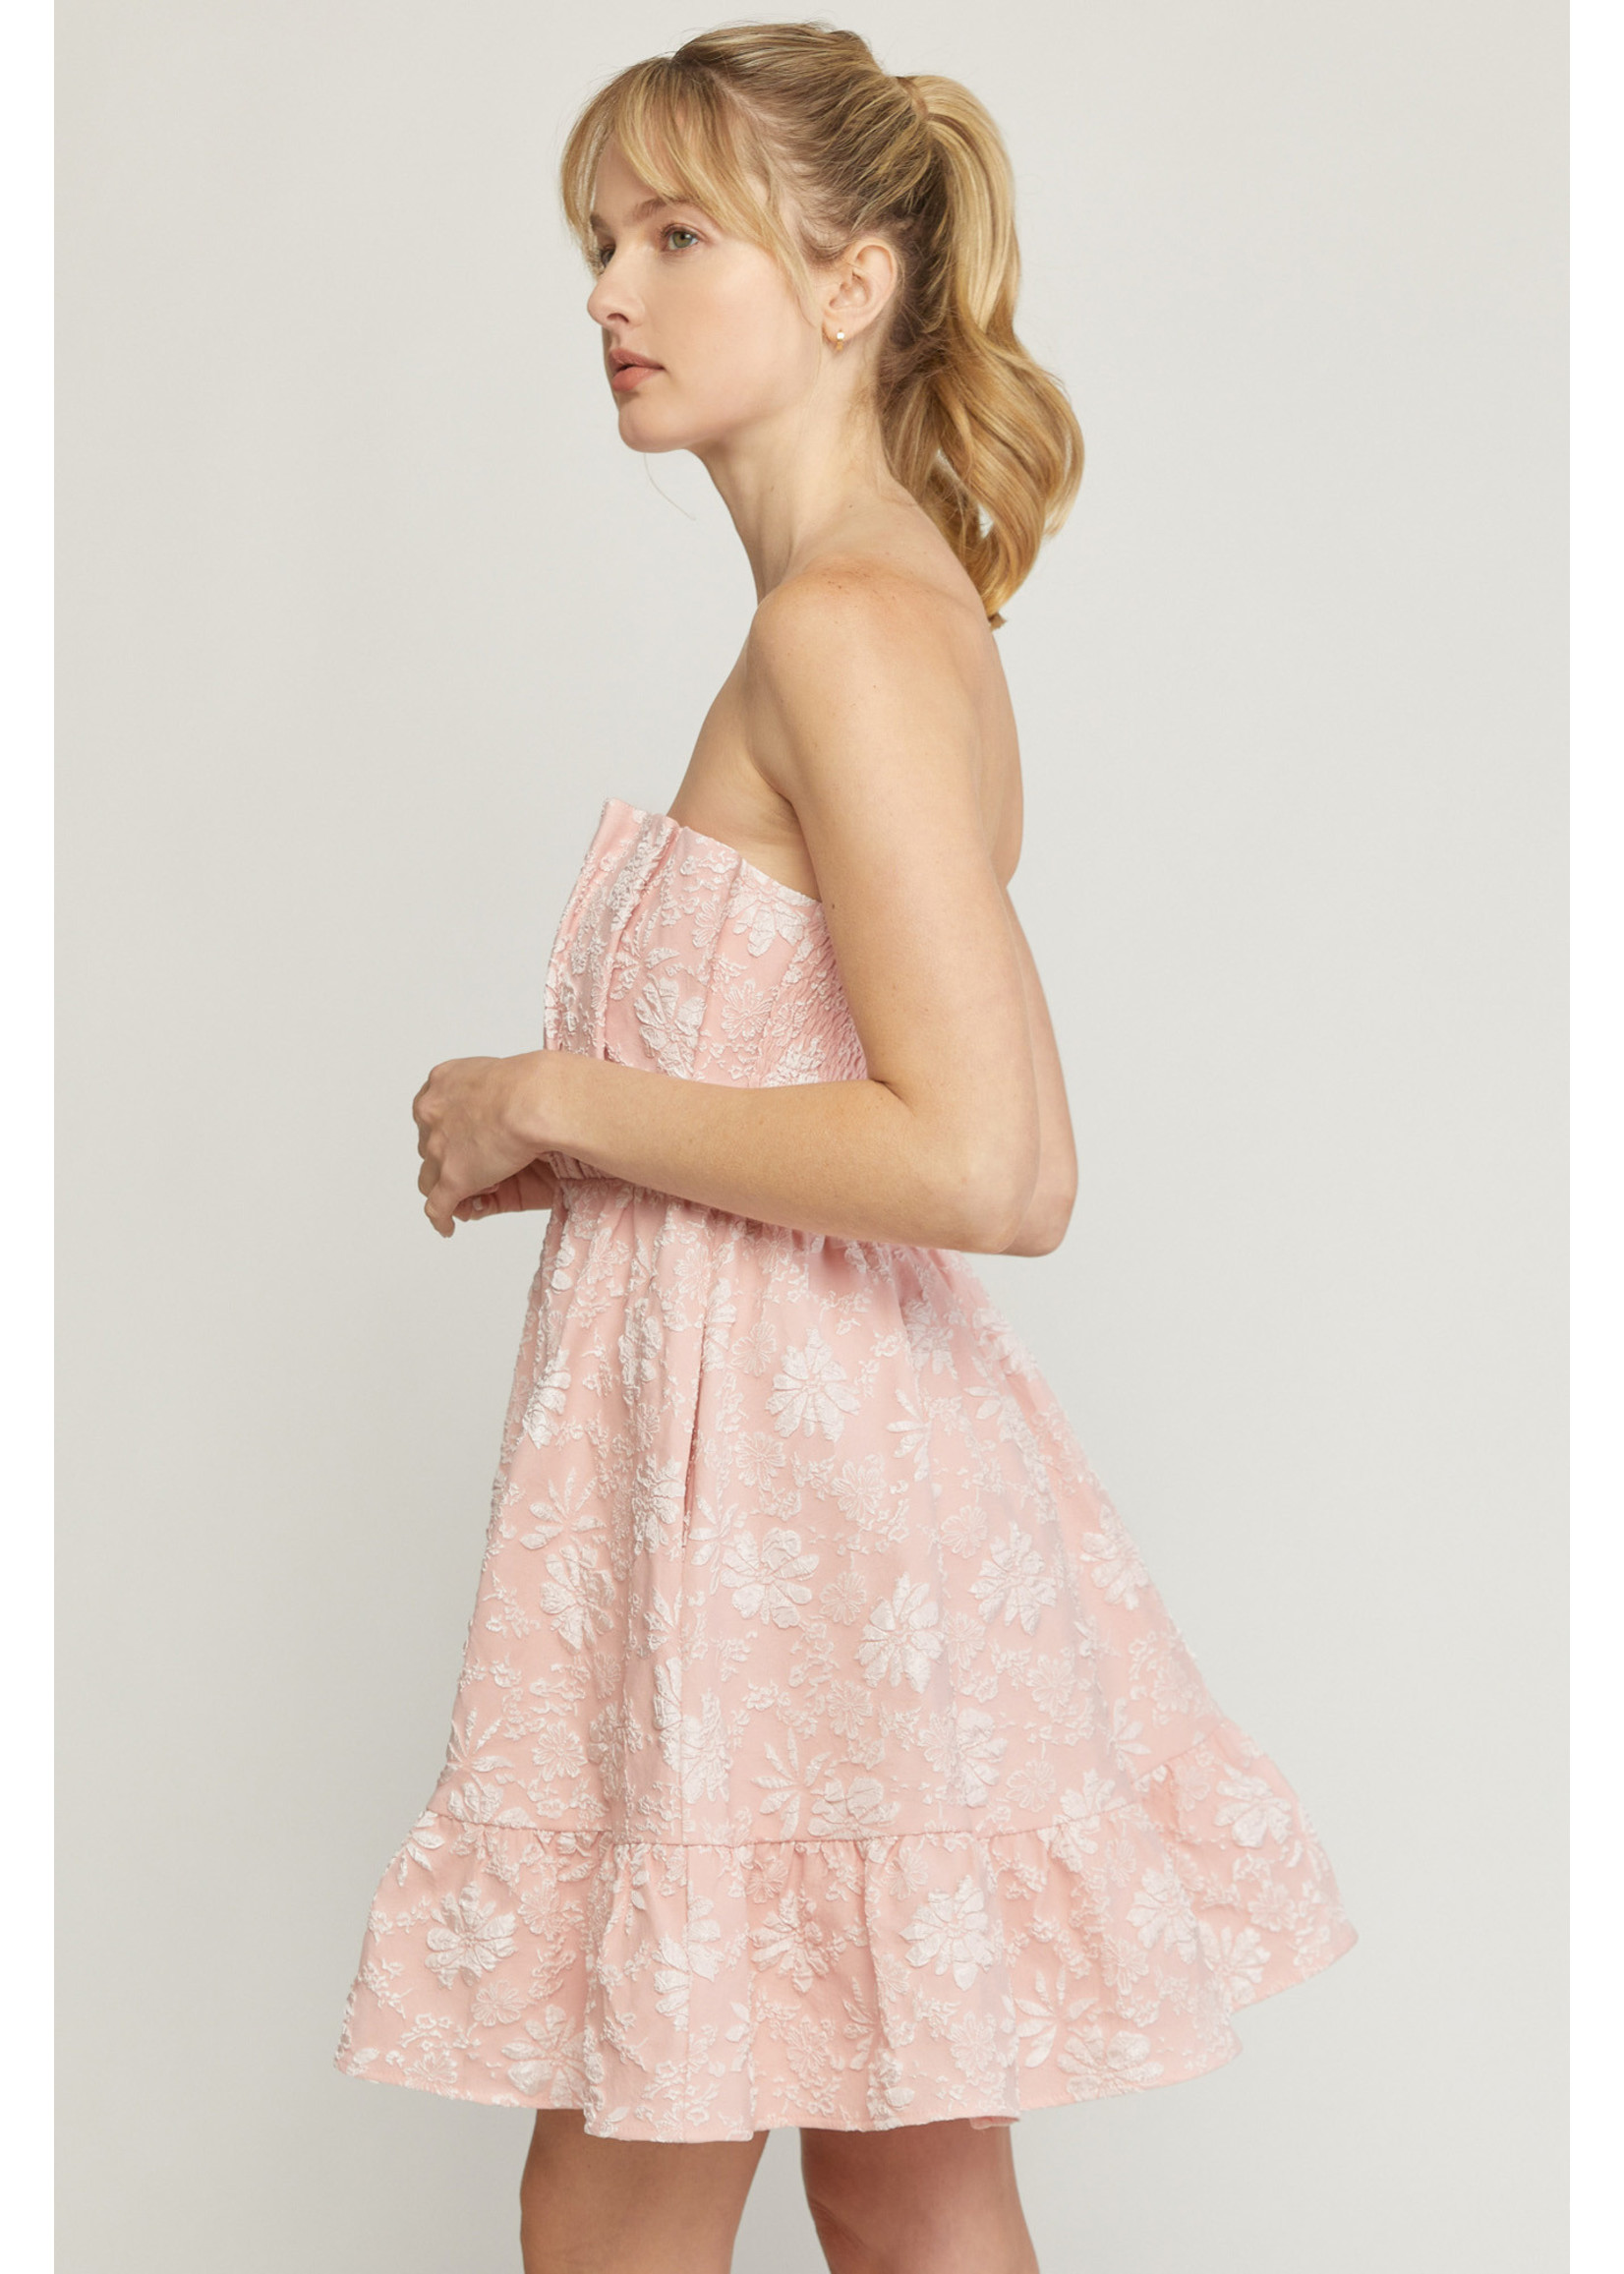 The Waldorf Pleated Floral Dress